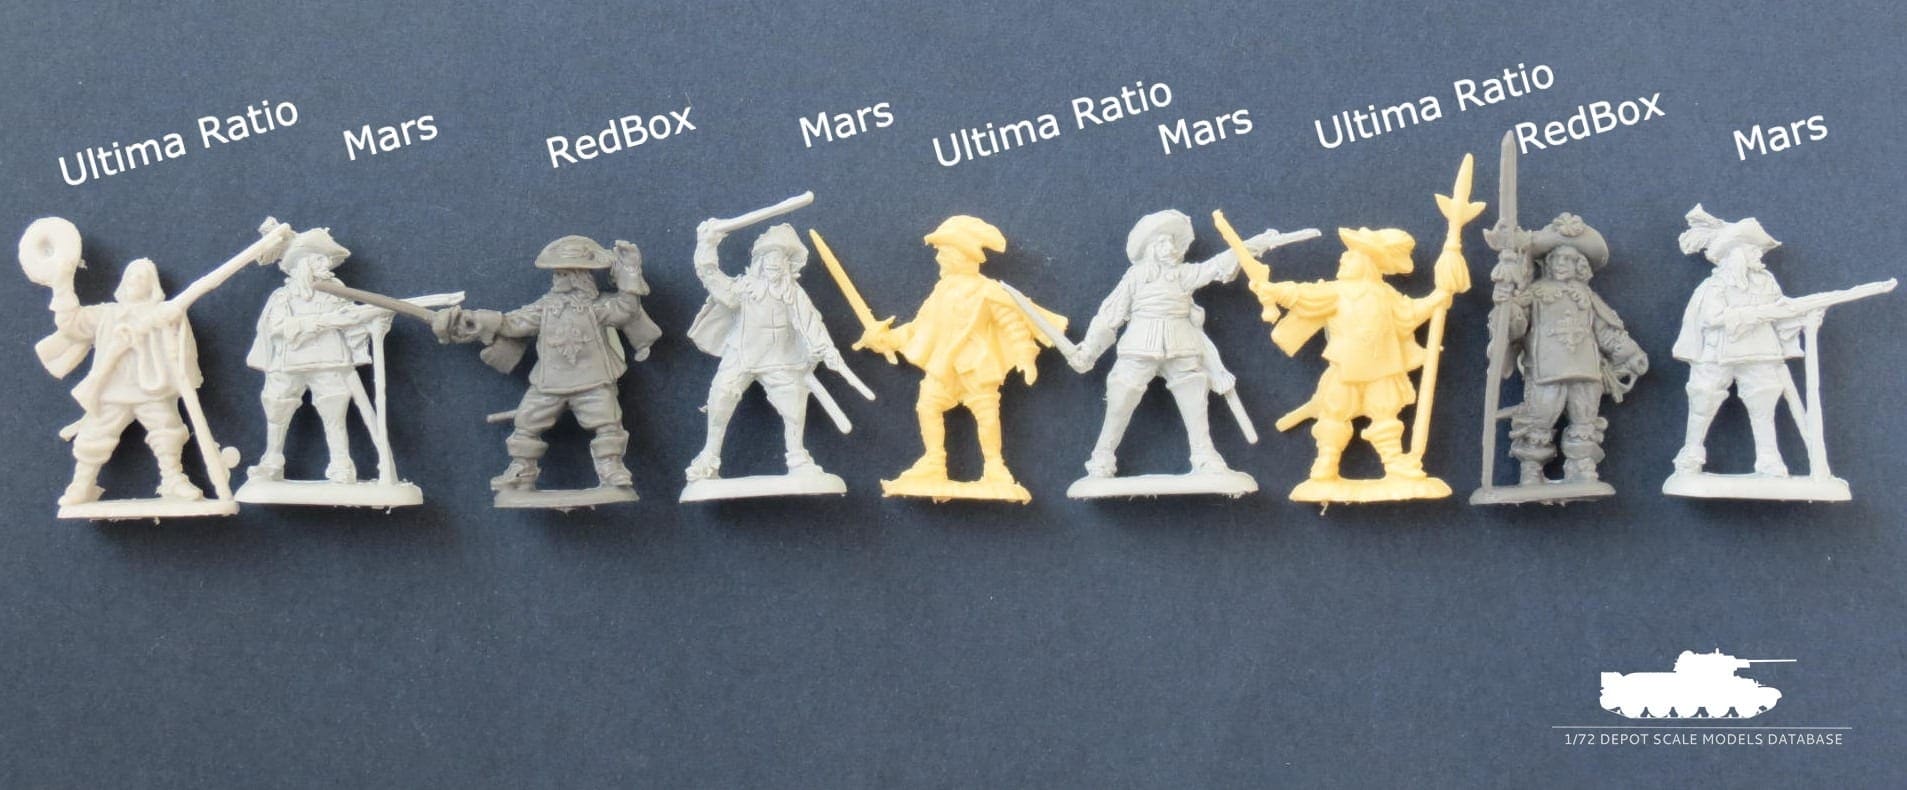 Musketeers of the King of France SOLDATINI 1/72 Red Box 72145 MADE UCRAINA 